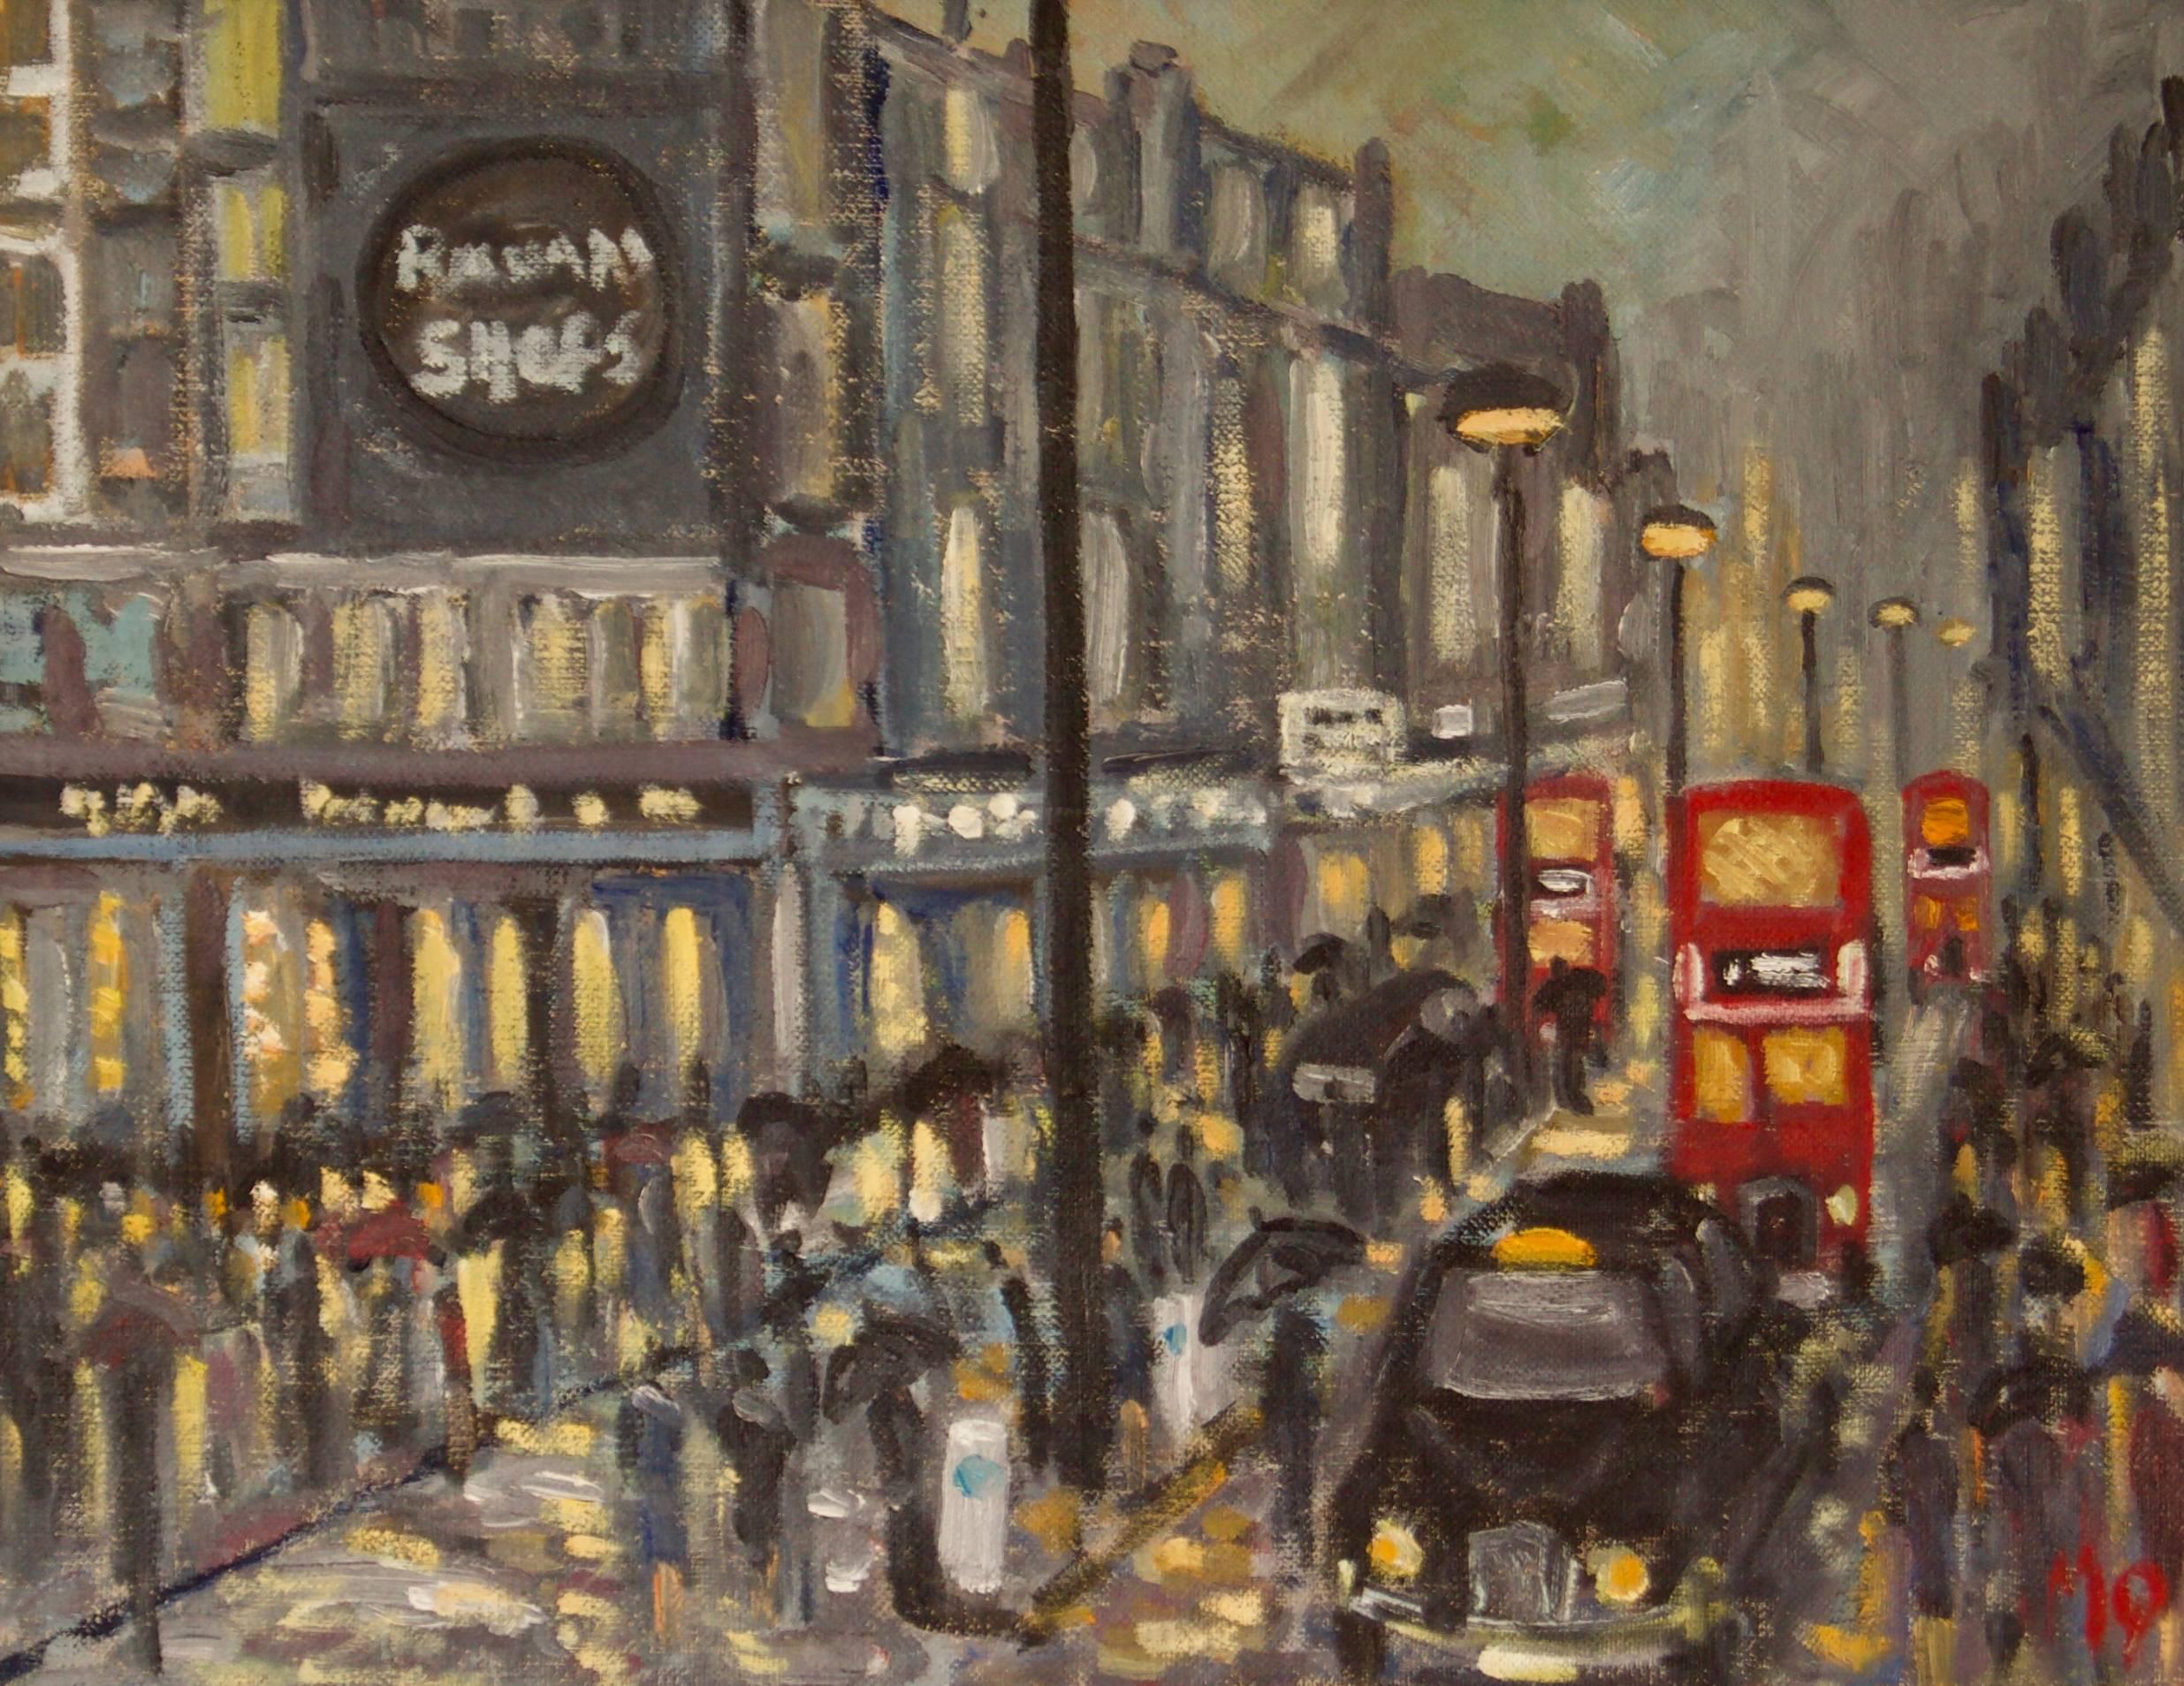 Michael Quirke Figurative Painting - Rainy Night Shopping in London - Late 20th Century Impressionist Piece by Quirke